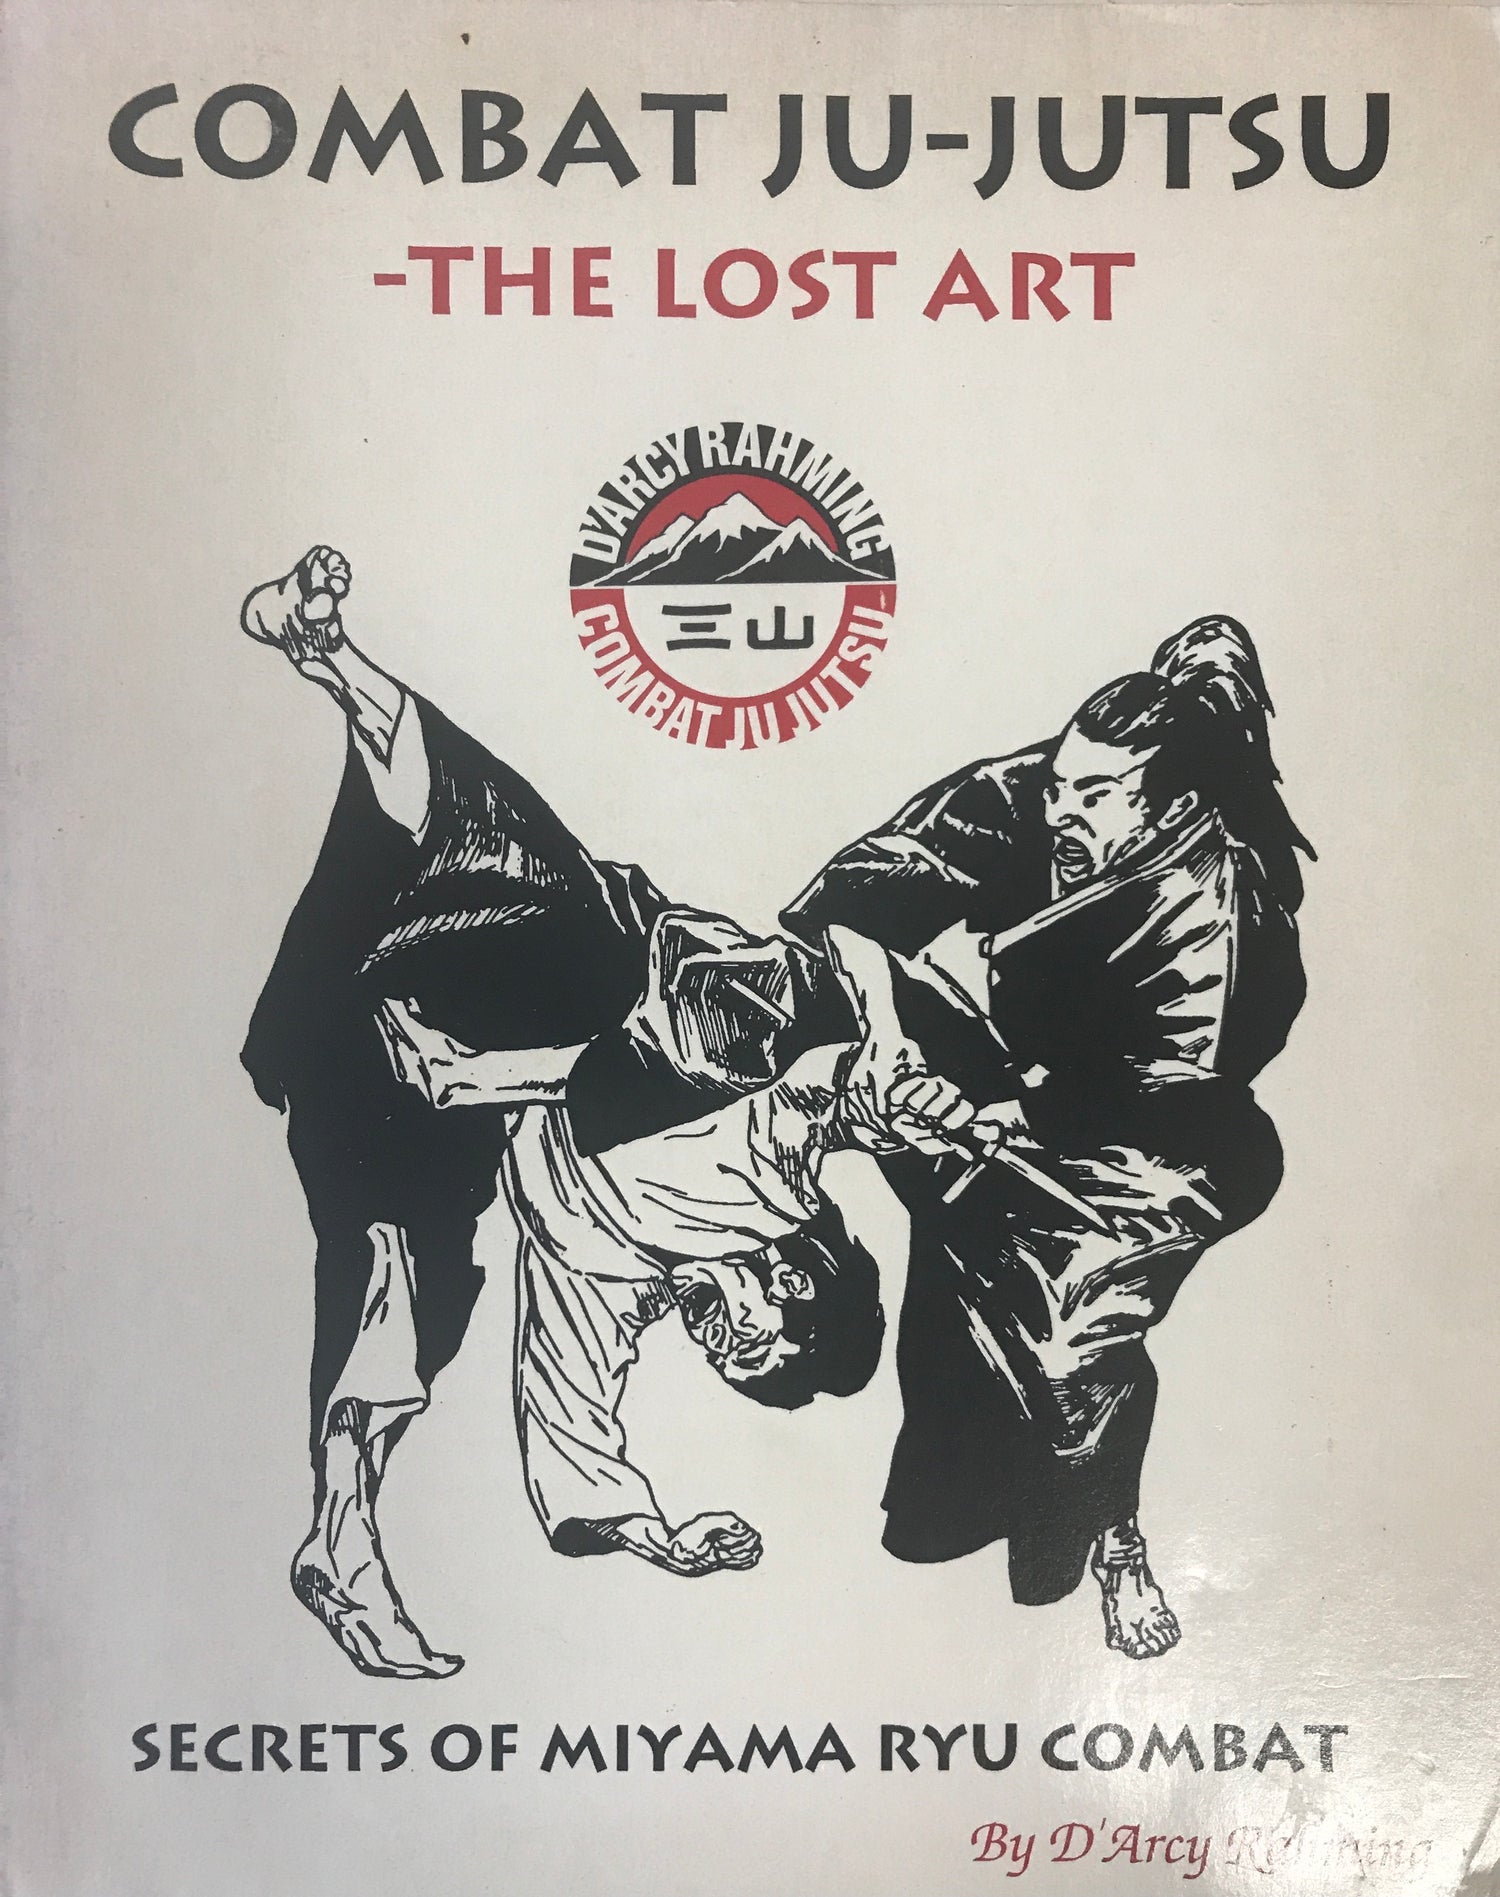 Combat Jujutsu The Lost Art: The Official Textbook of the Miyama Ryu Jujutsu Book by Darcy Rahming (Preowned) - Budovideos Inc